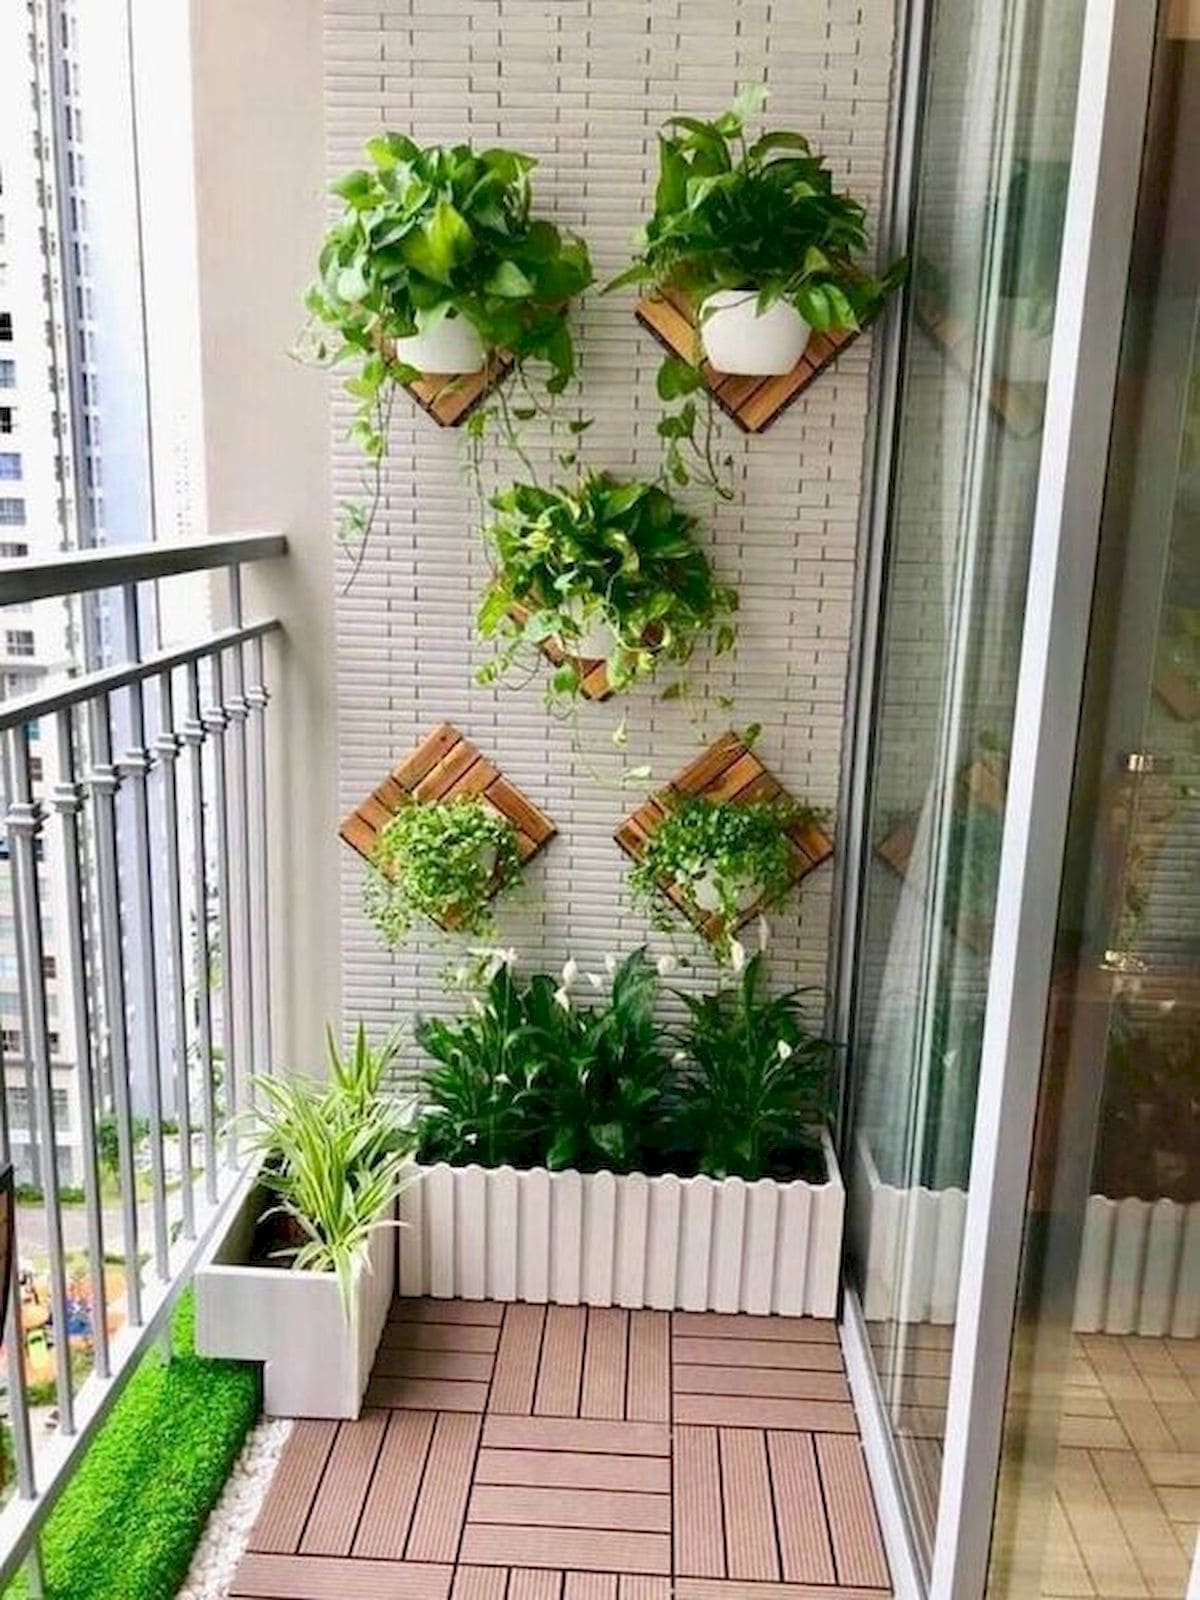 26 creative ideas to make your home greener - 79